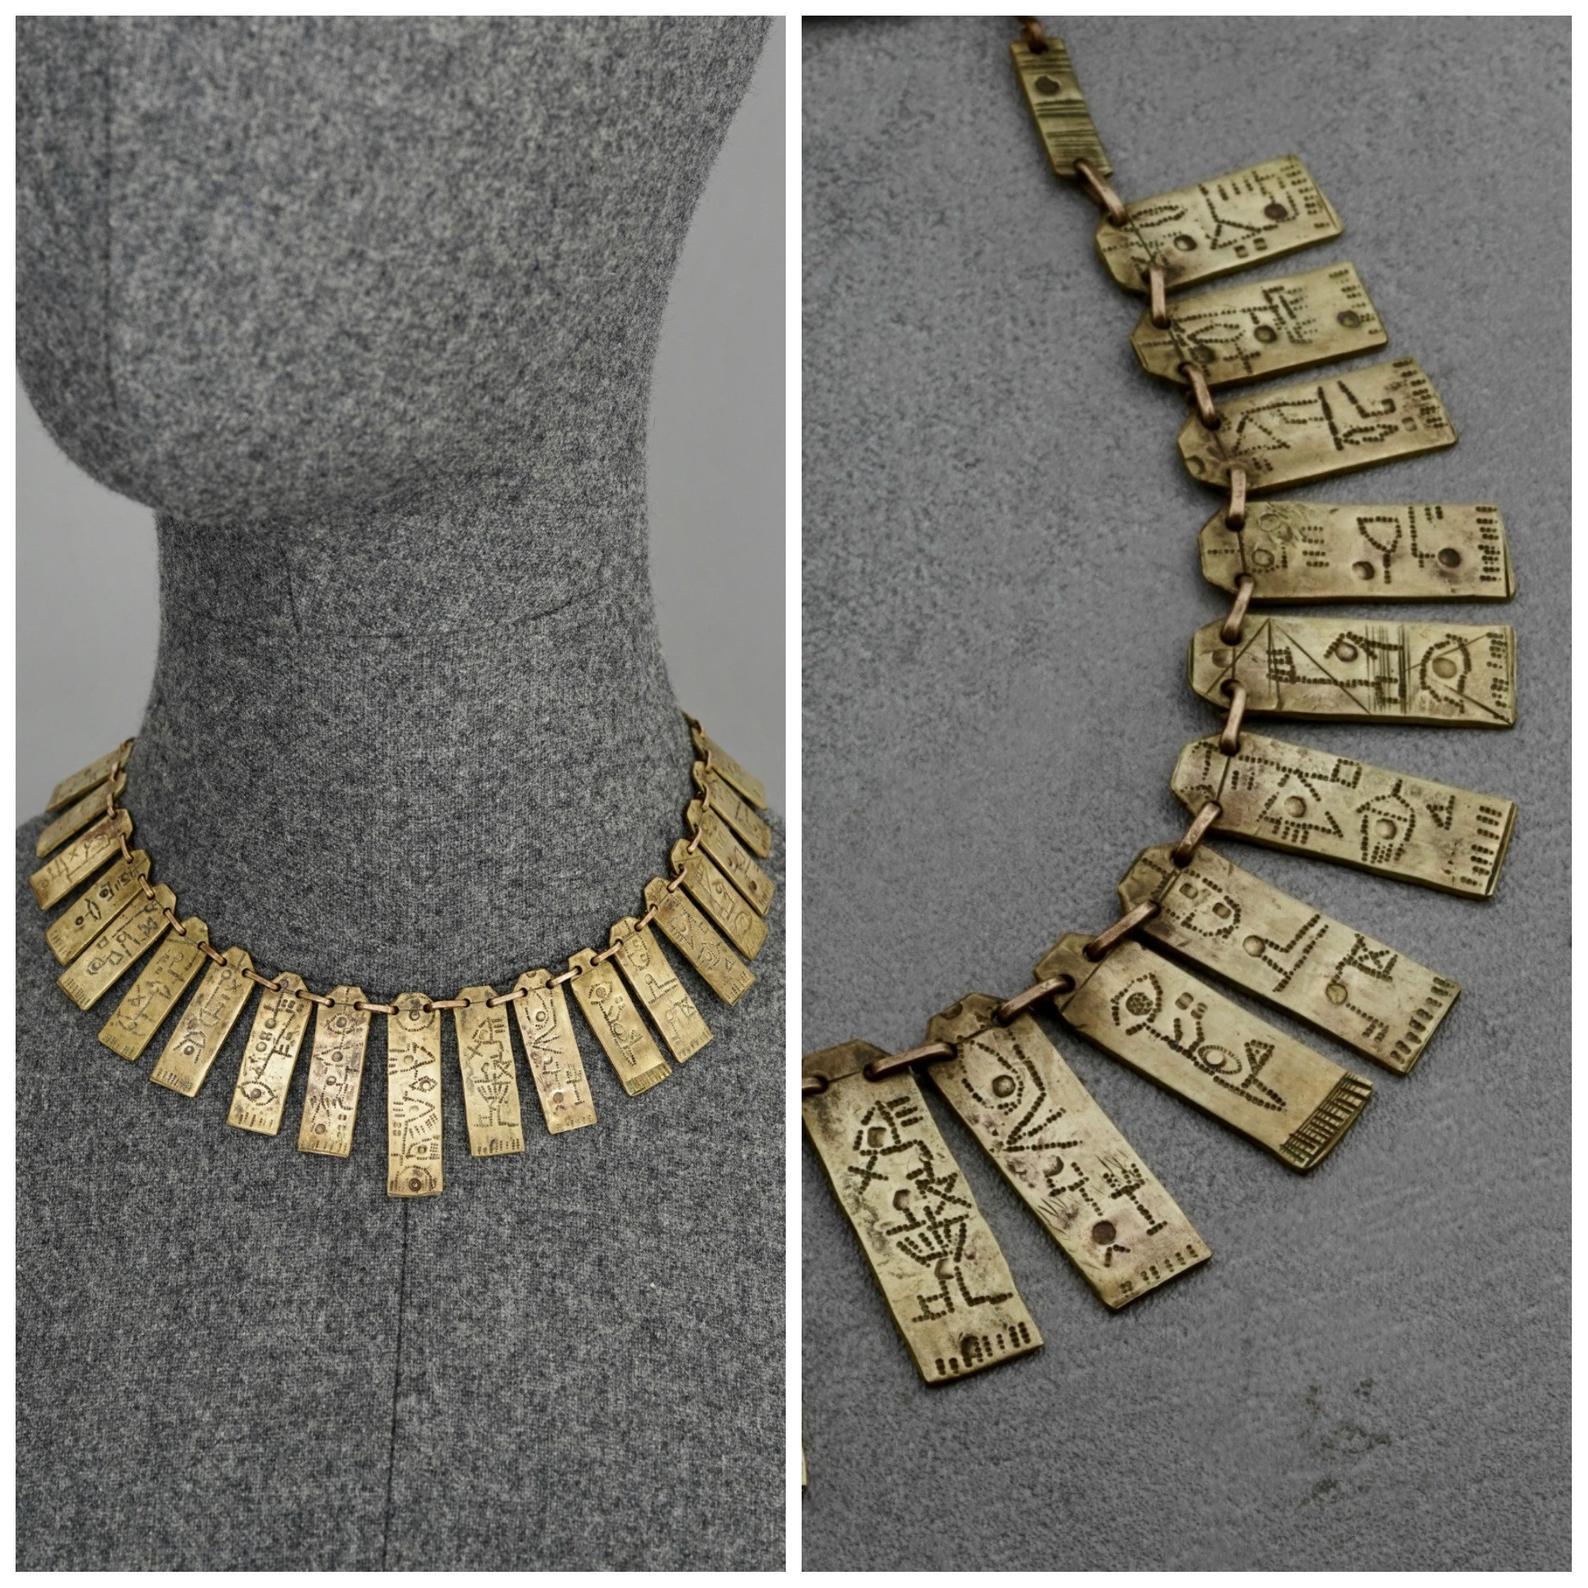 Vintage Mid Century Inca Symbol Plates Choker Necklace

Measurements:
Symbol: 1.57 inches (4 cm)
Wearable Length: 14.96 inches (38 cm)

Features:
- Mid century choker necklace with Inca symbols engraved on plate charms.
- Bronze tone.
- Hook